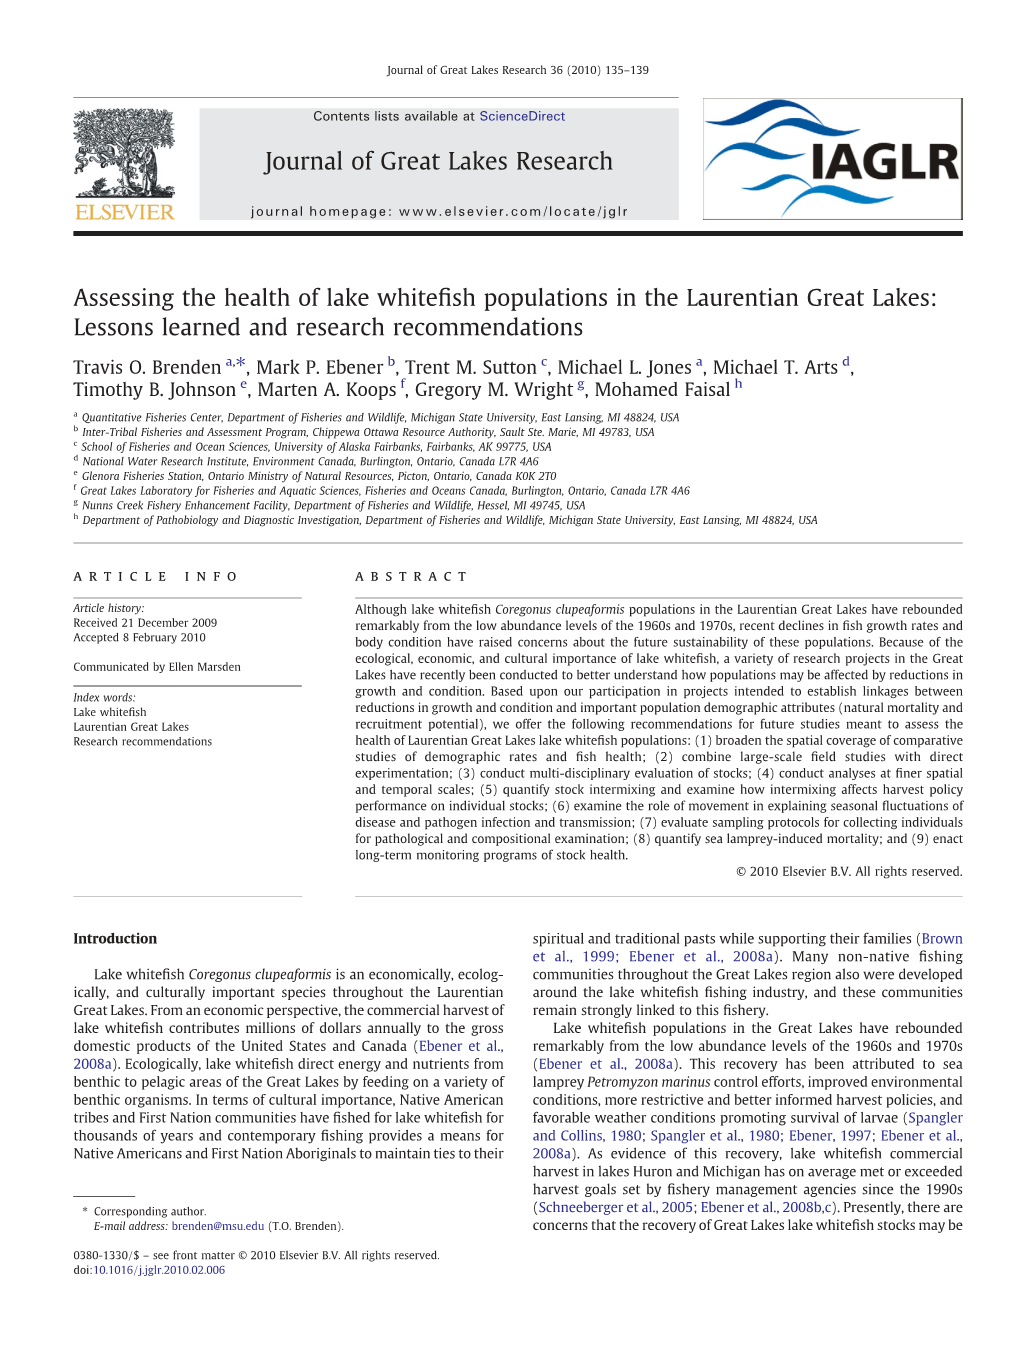 Assessing the Health of Lake Whitefish Populations in the Laurentian Great